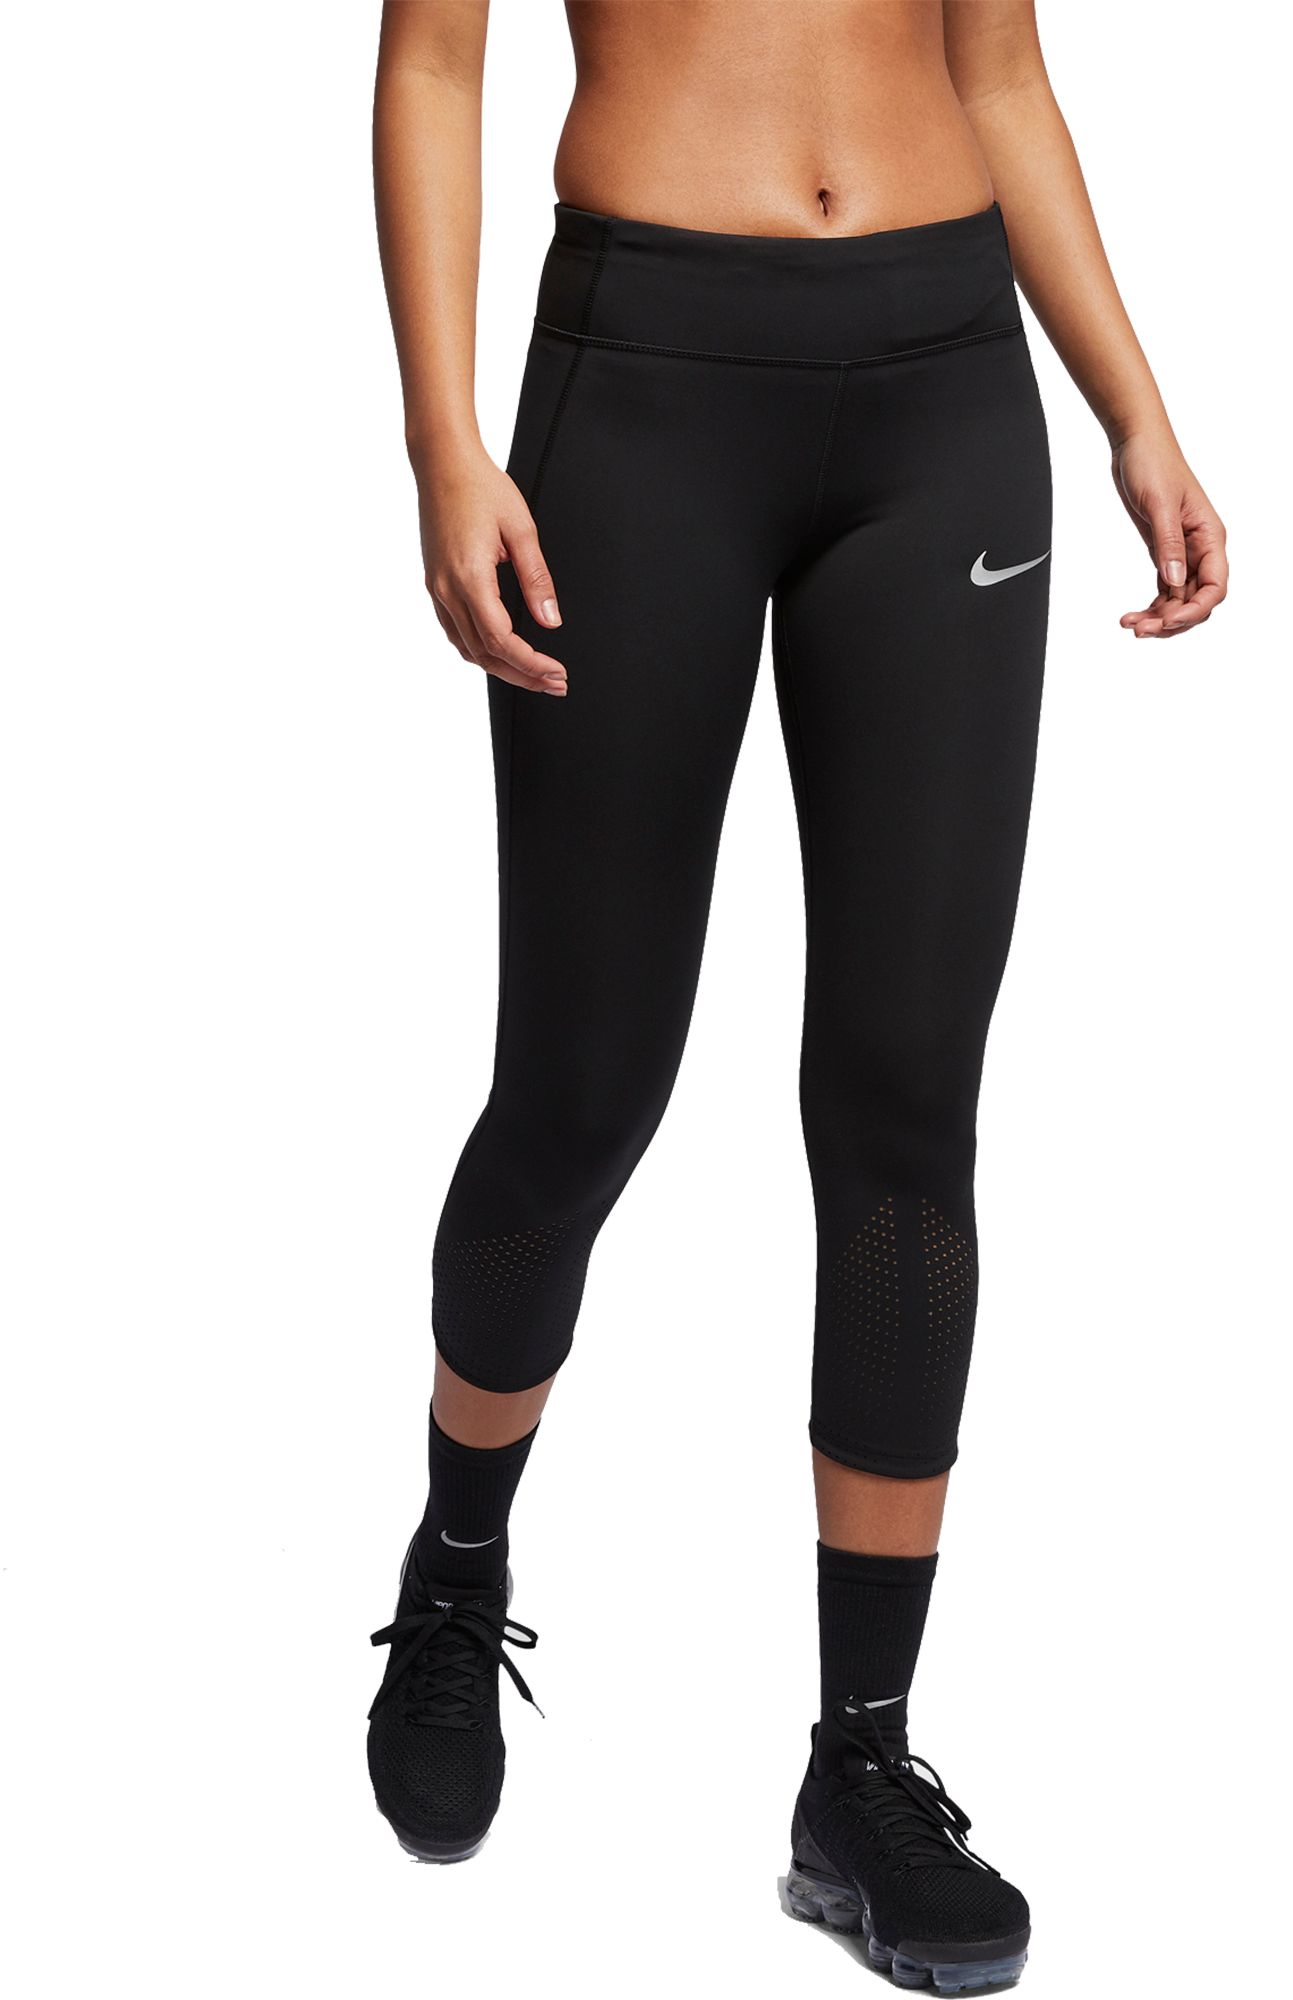 nike epic lux women's tights